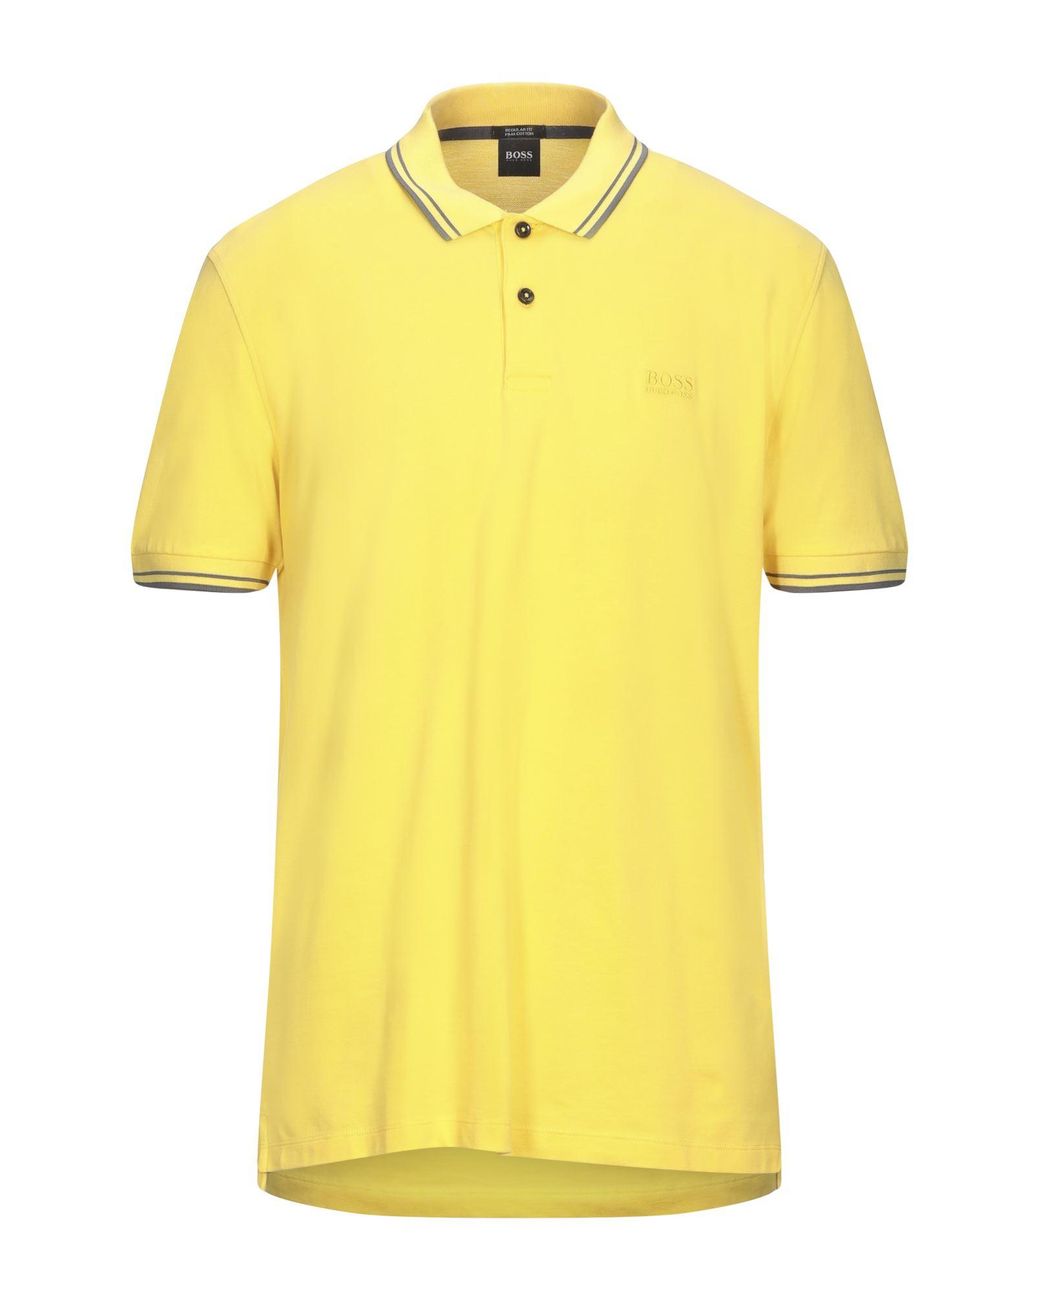 BOSS by Hugo Boss Cotton Polo Shirt in Light Yellow (Yellow) for Men - Lyst